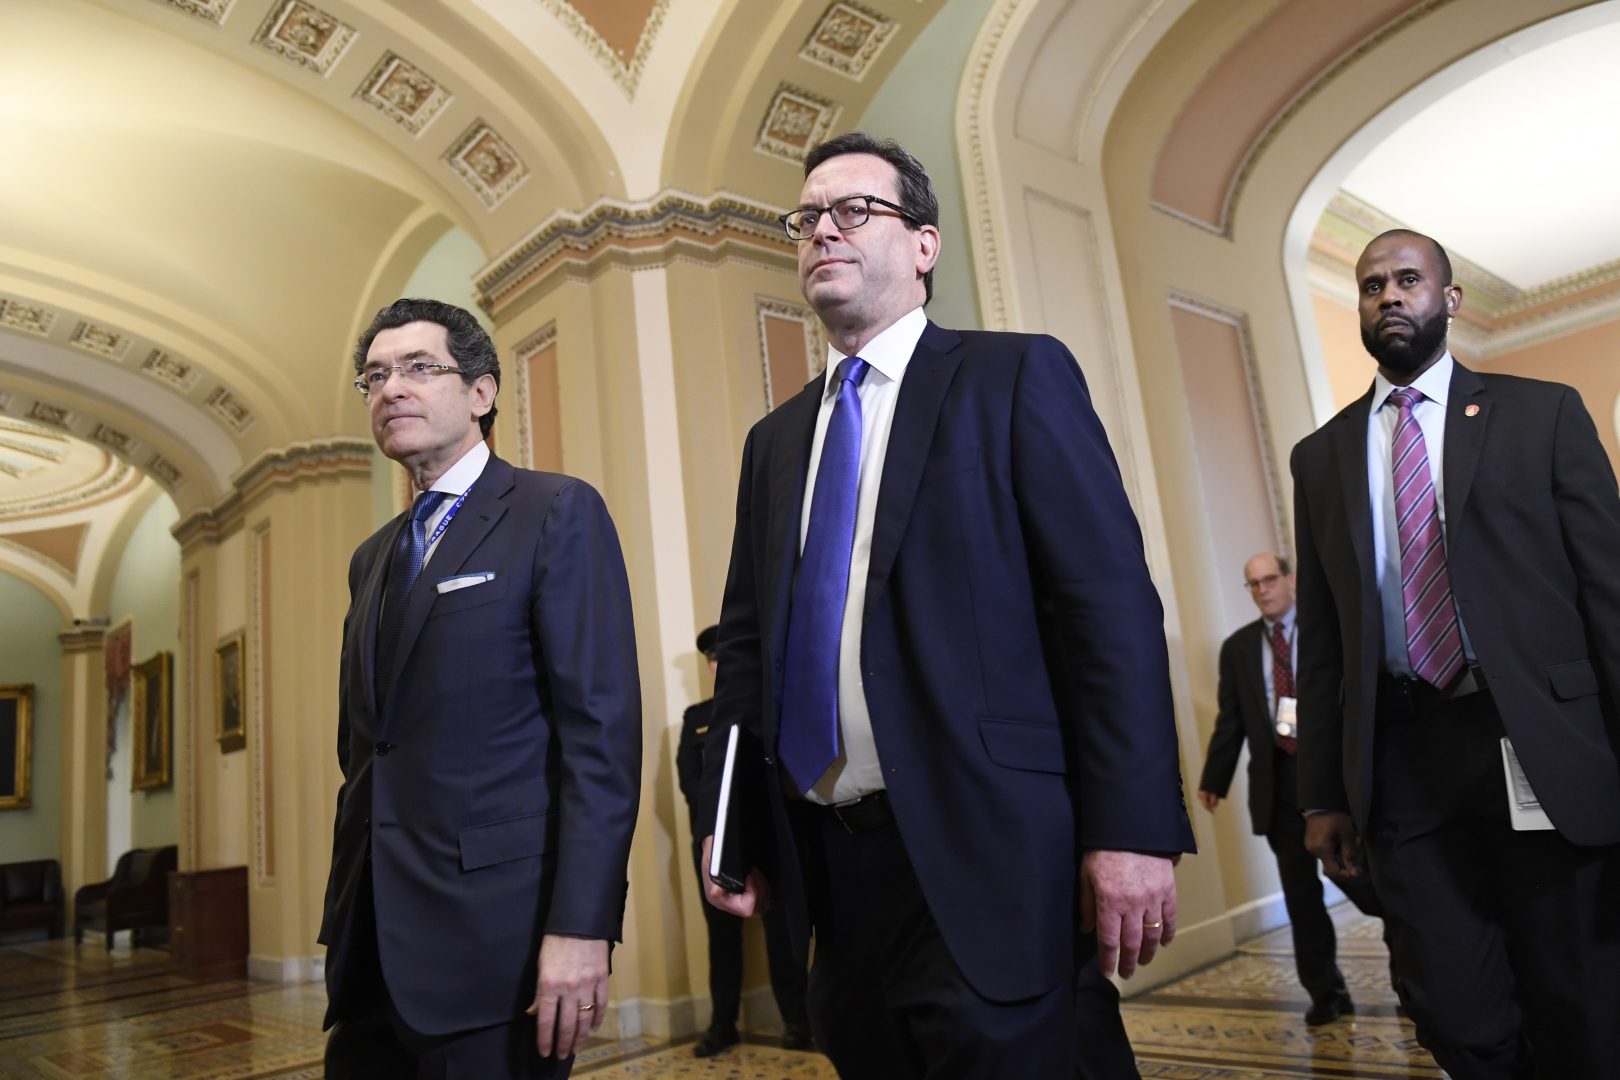 House Democrat attorneys Norm Eisen, left, and Barry Berke, center, arrive on the Senate side of Capitol Hill in Washington, Monday, Feb. 3, 2020, for the impeachment trial of President Donald Trump.